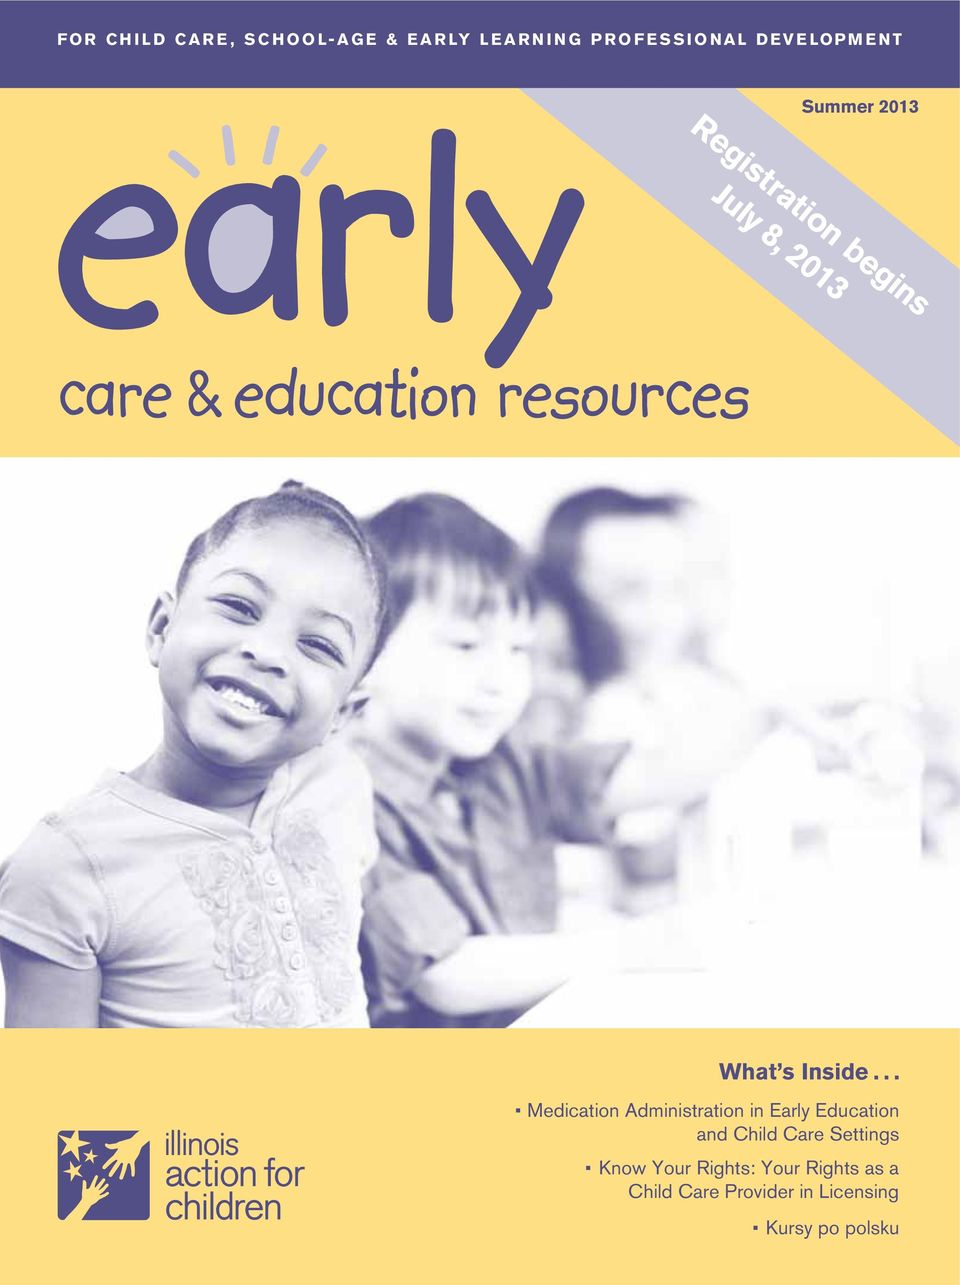 .. Medication Administration in Early Education and Child Care Settings